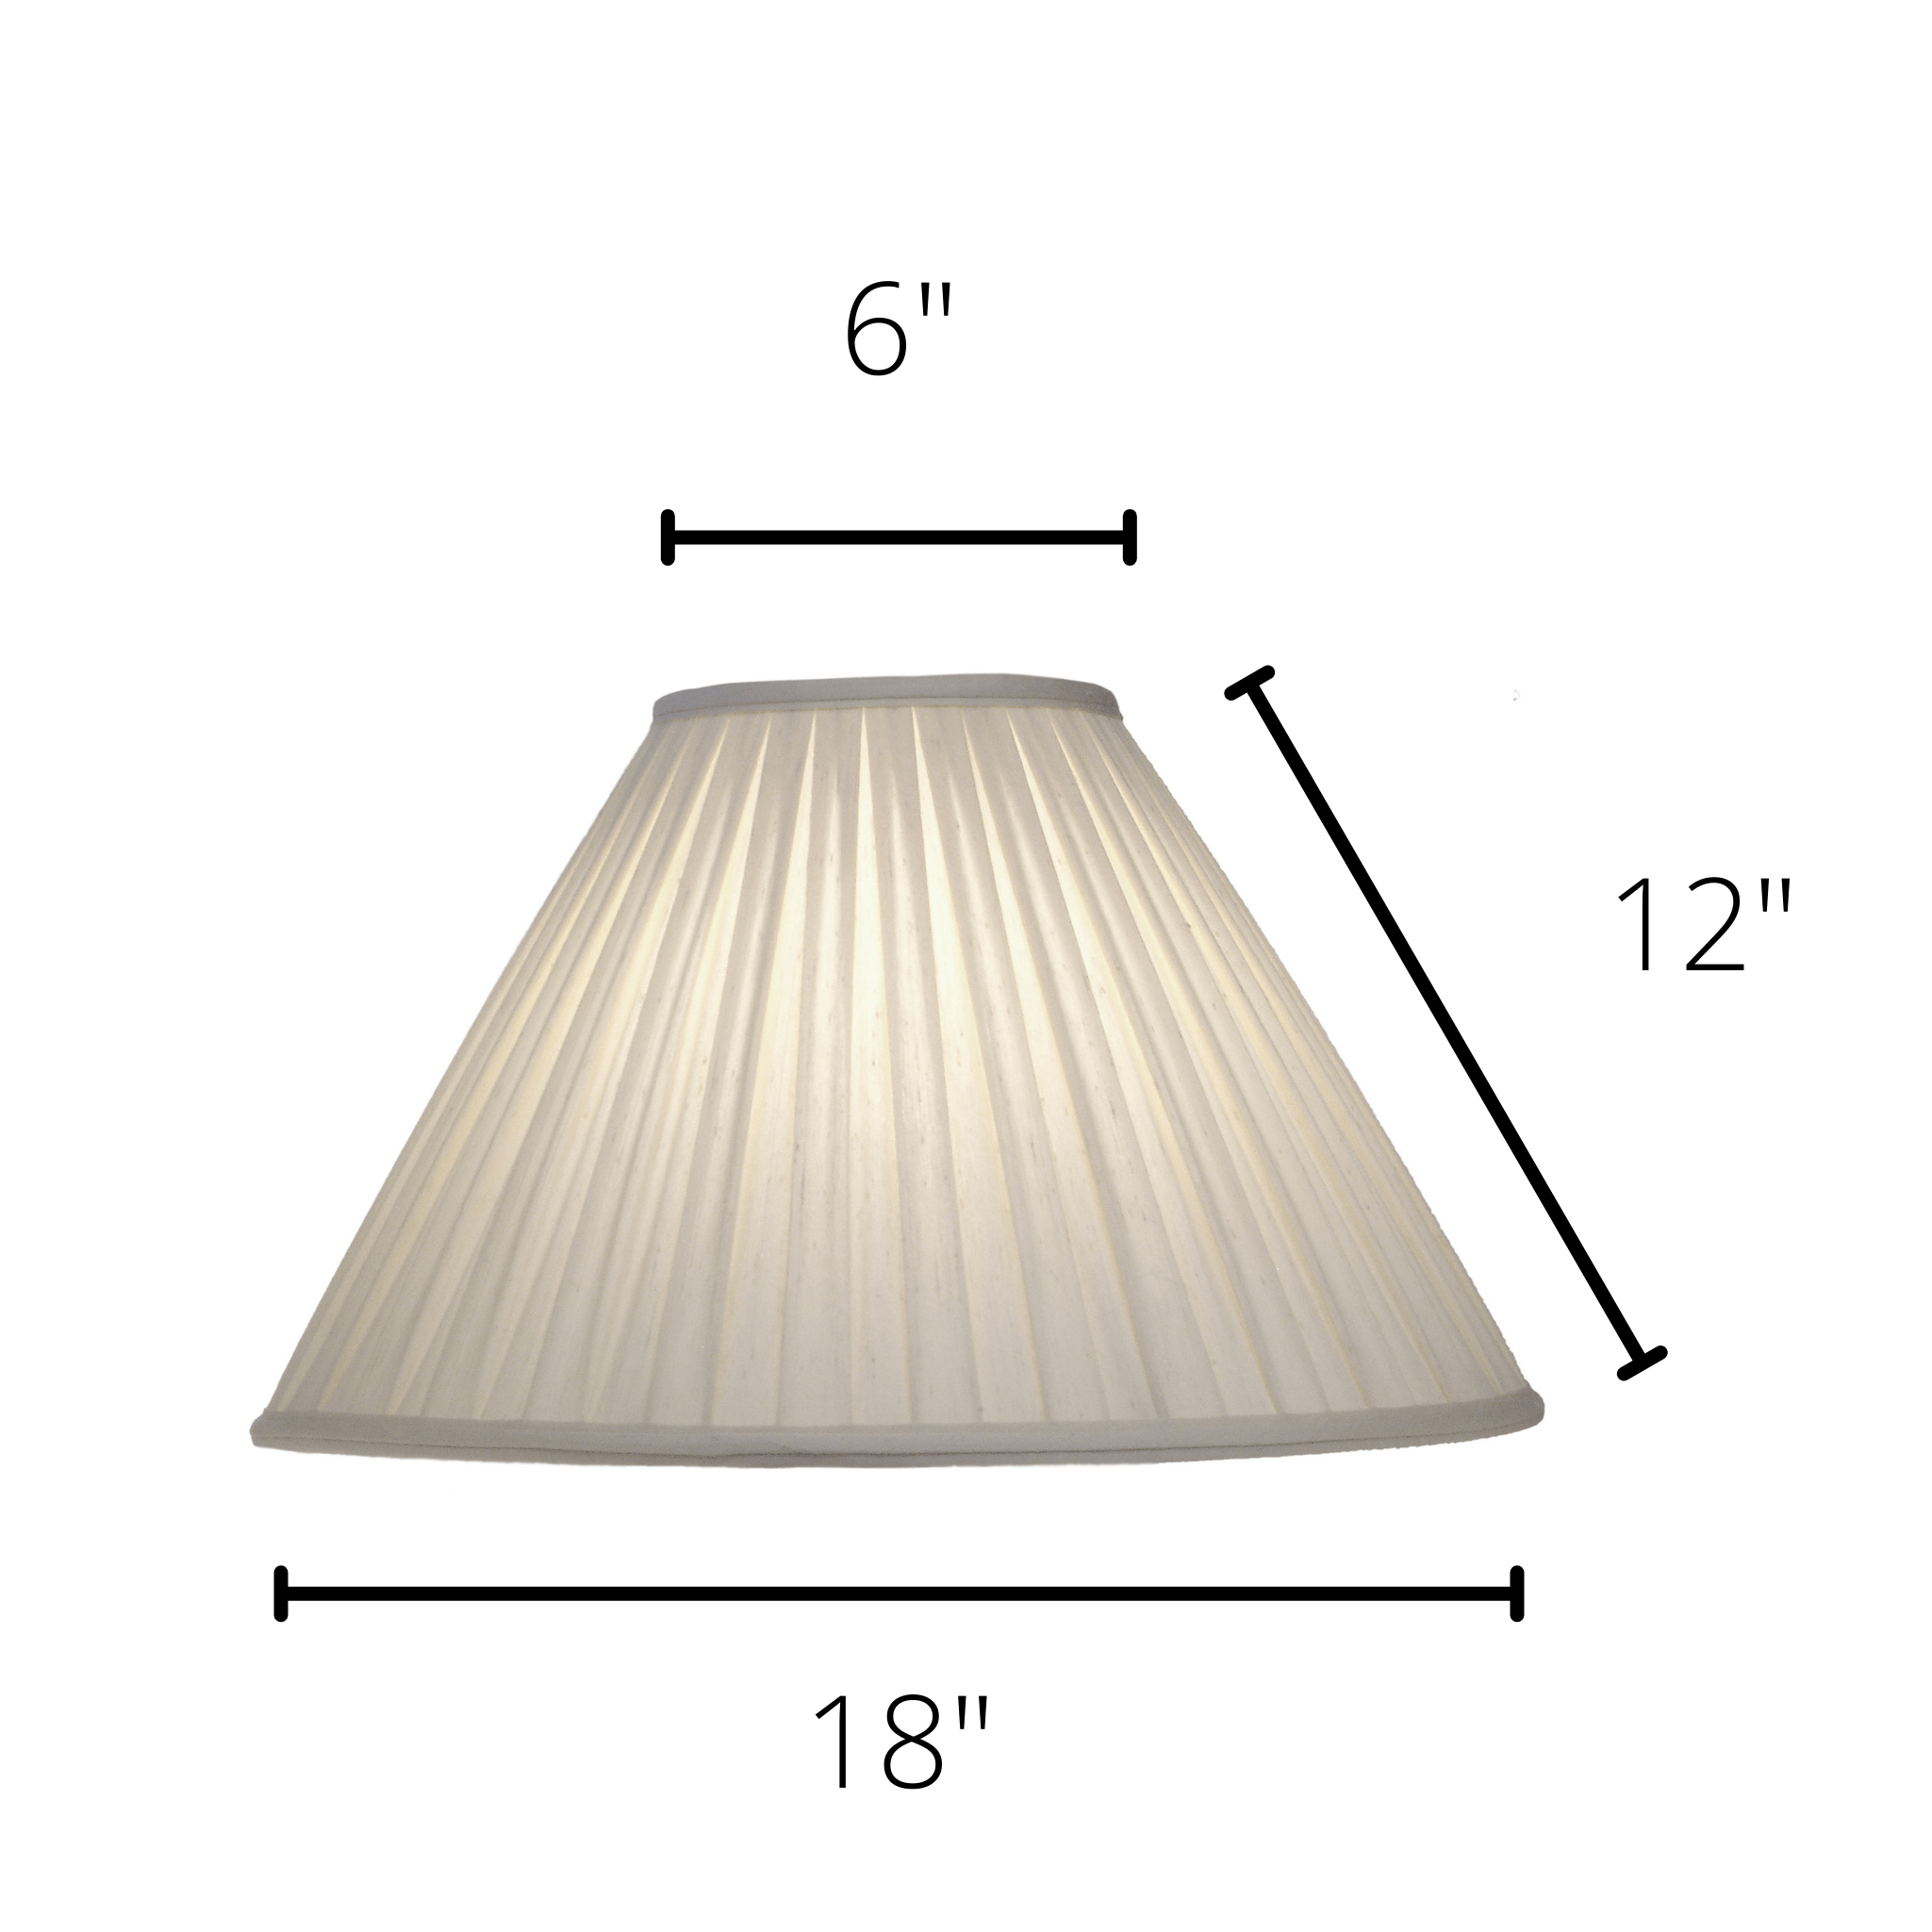 stiffel lamp shade replacement